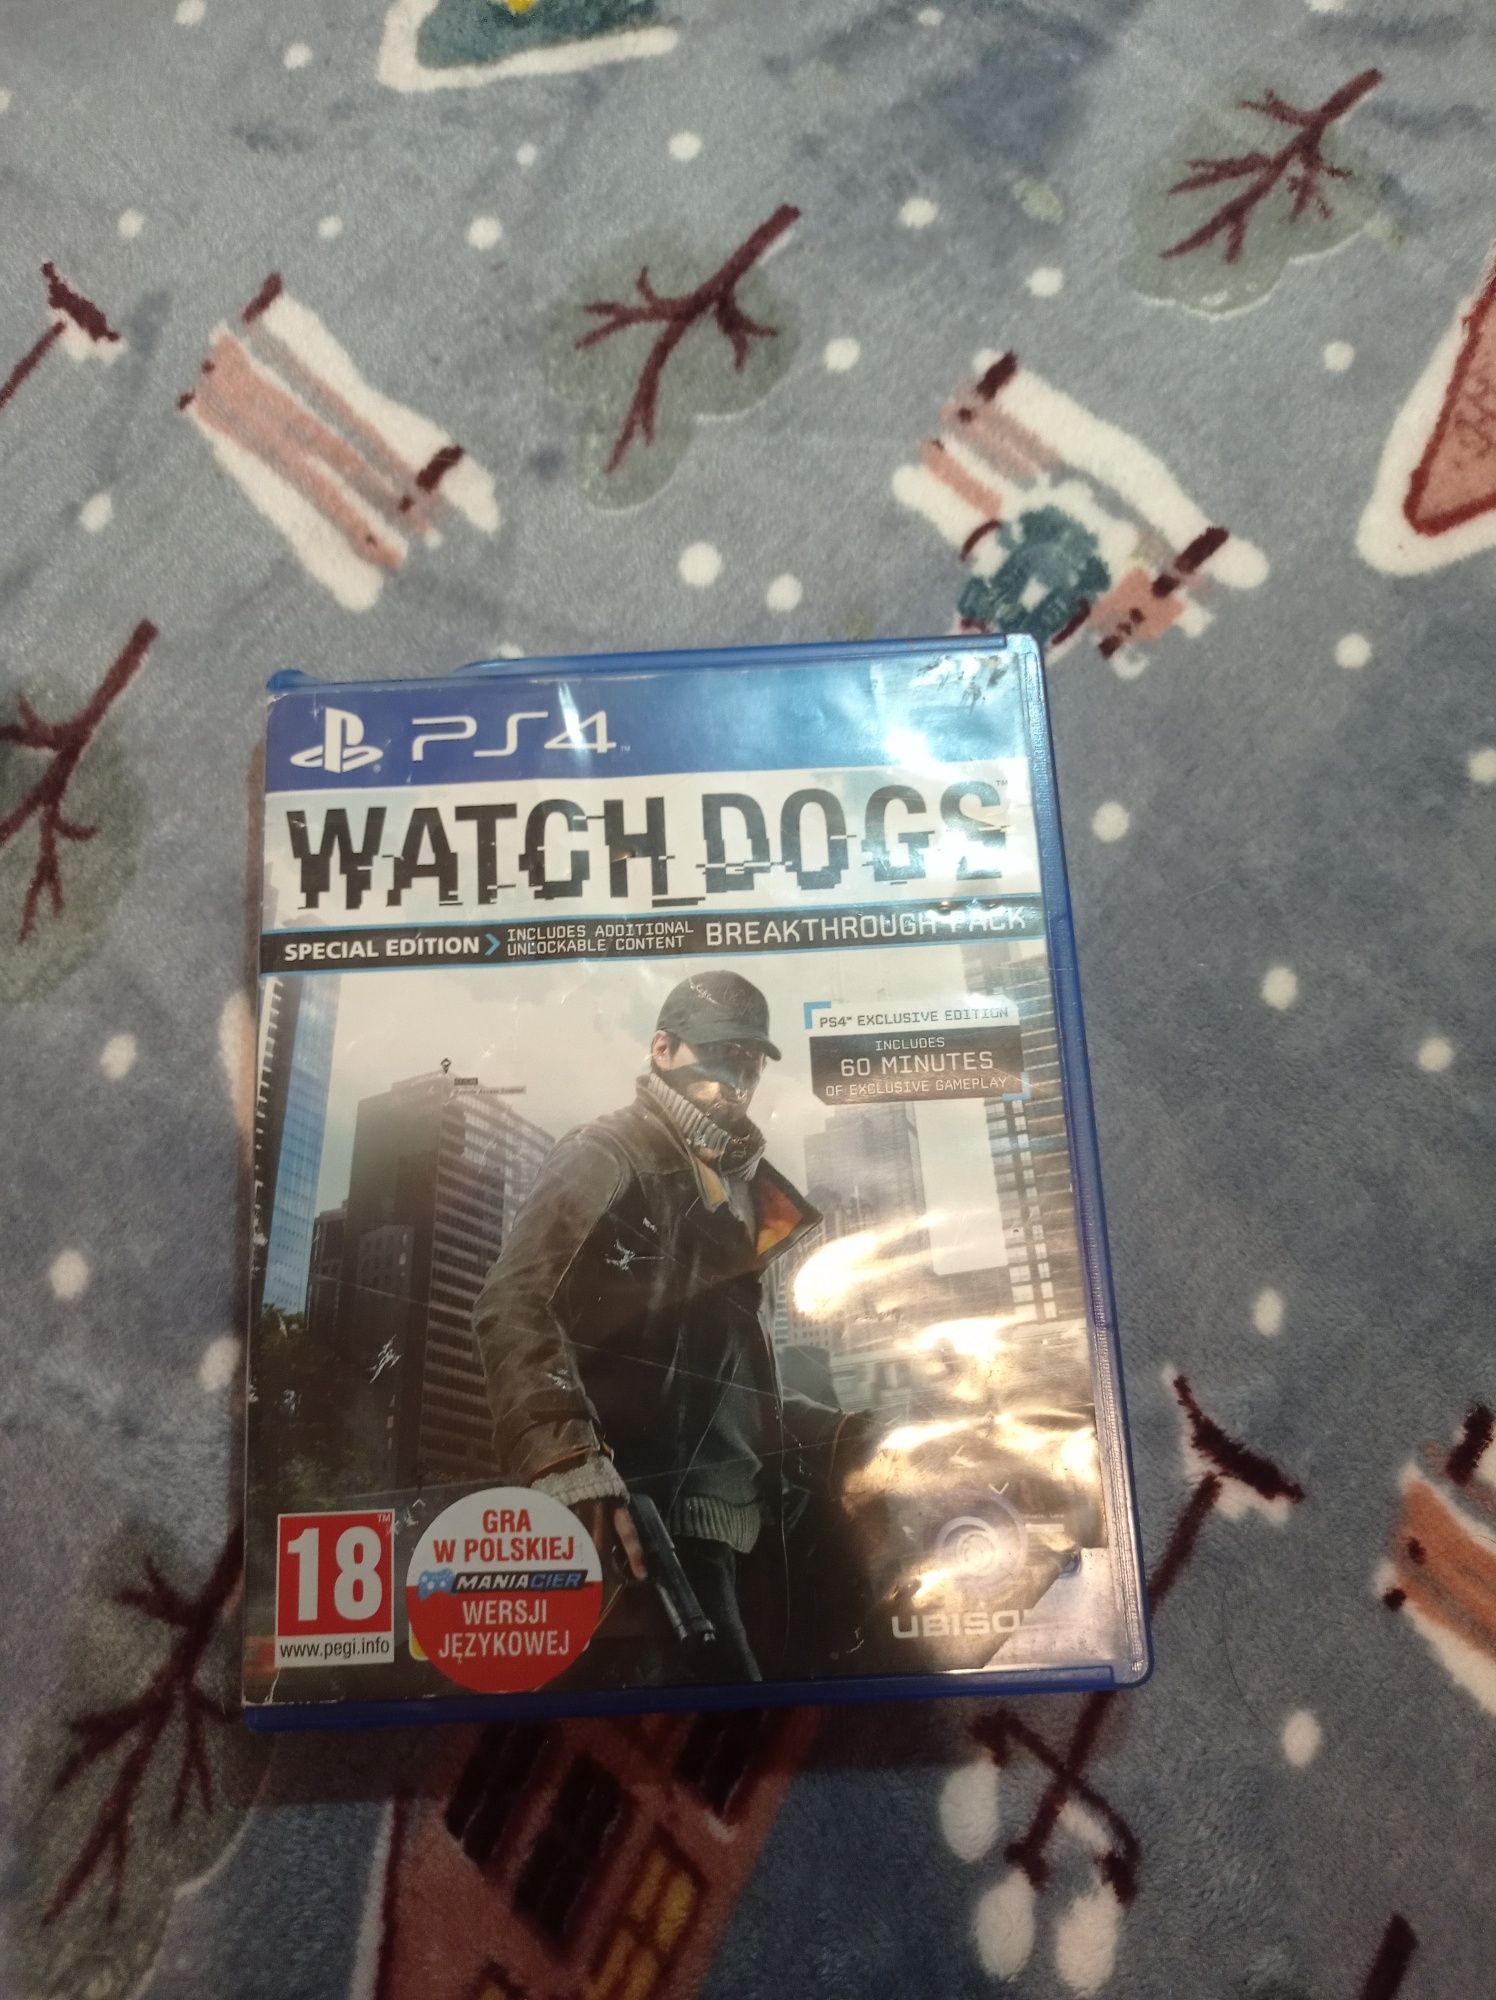 WATCH DOGS special edition